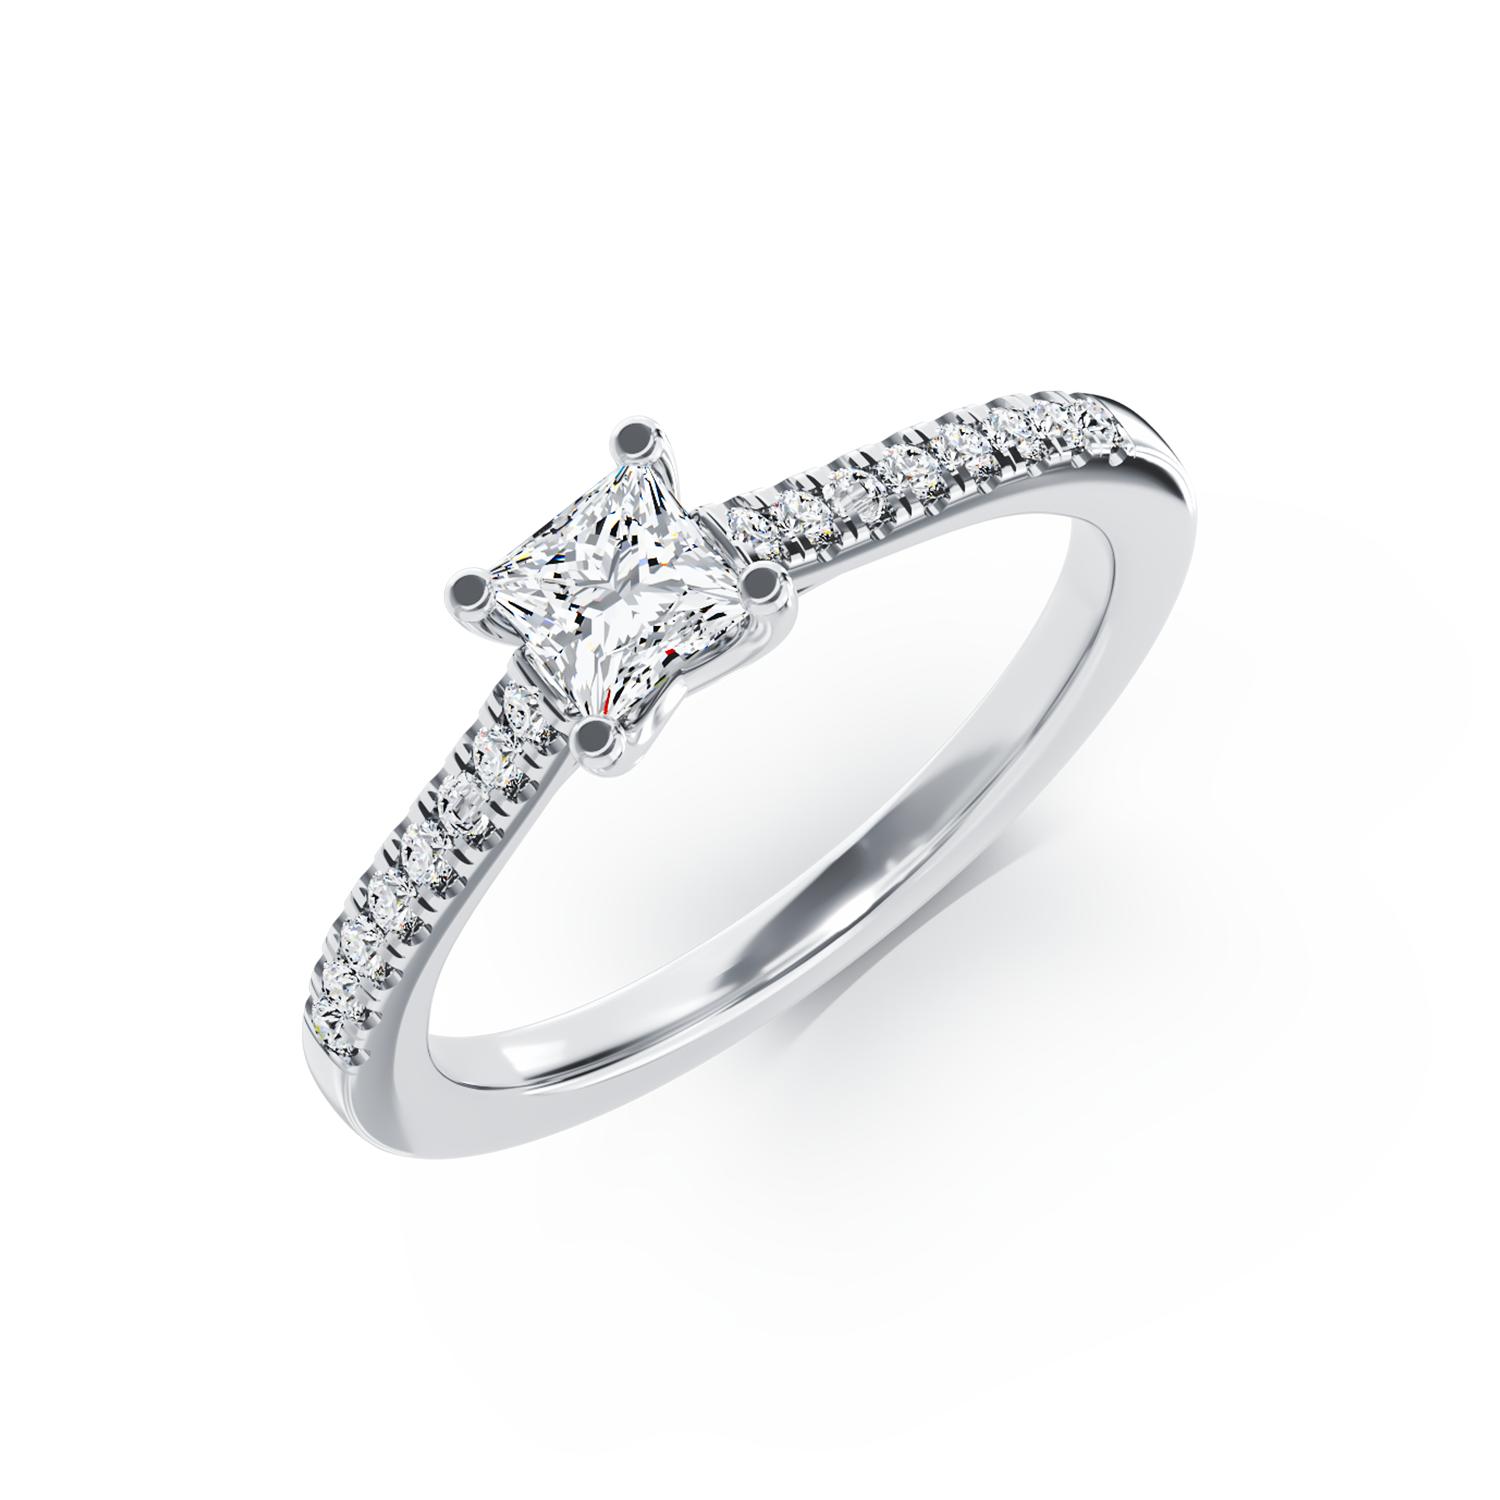 18K white gold engagement ring with diamond of 0.245ct and diamonds of 0.115ct